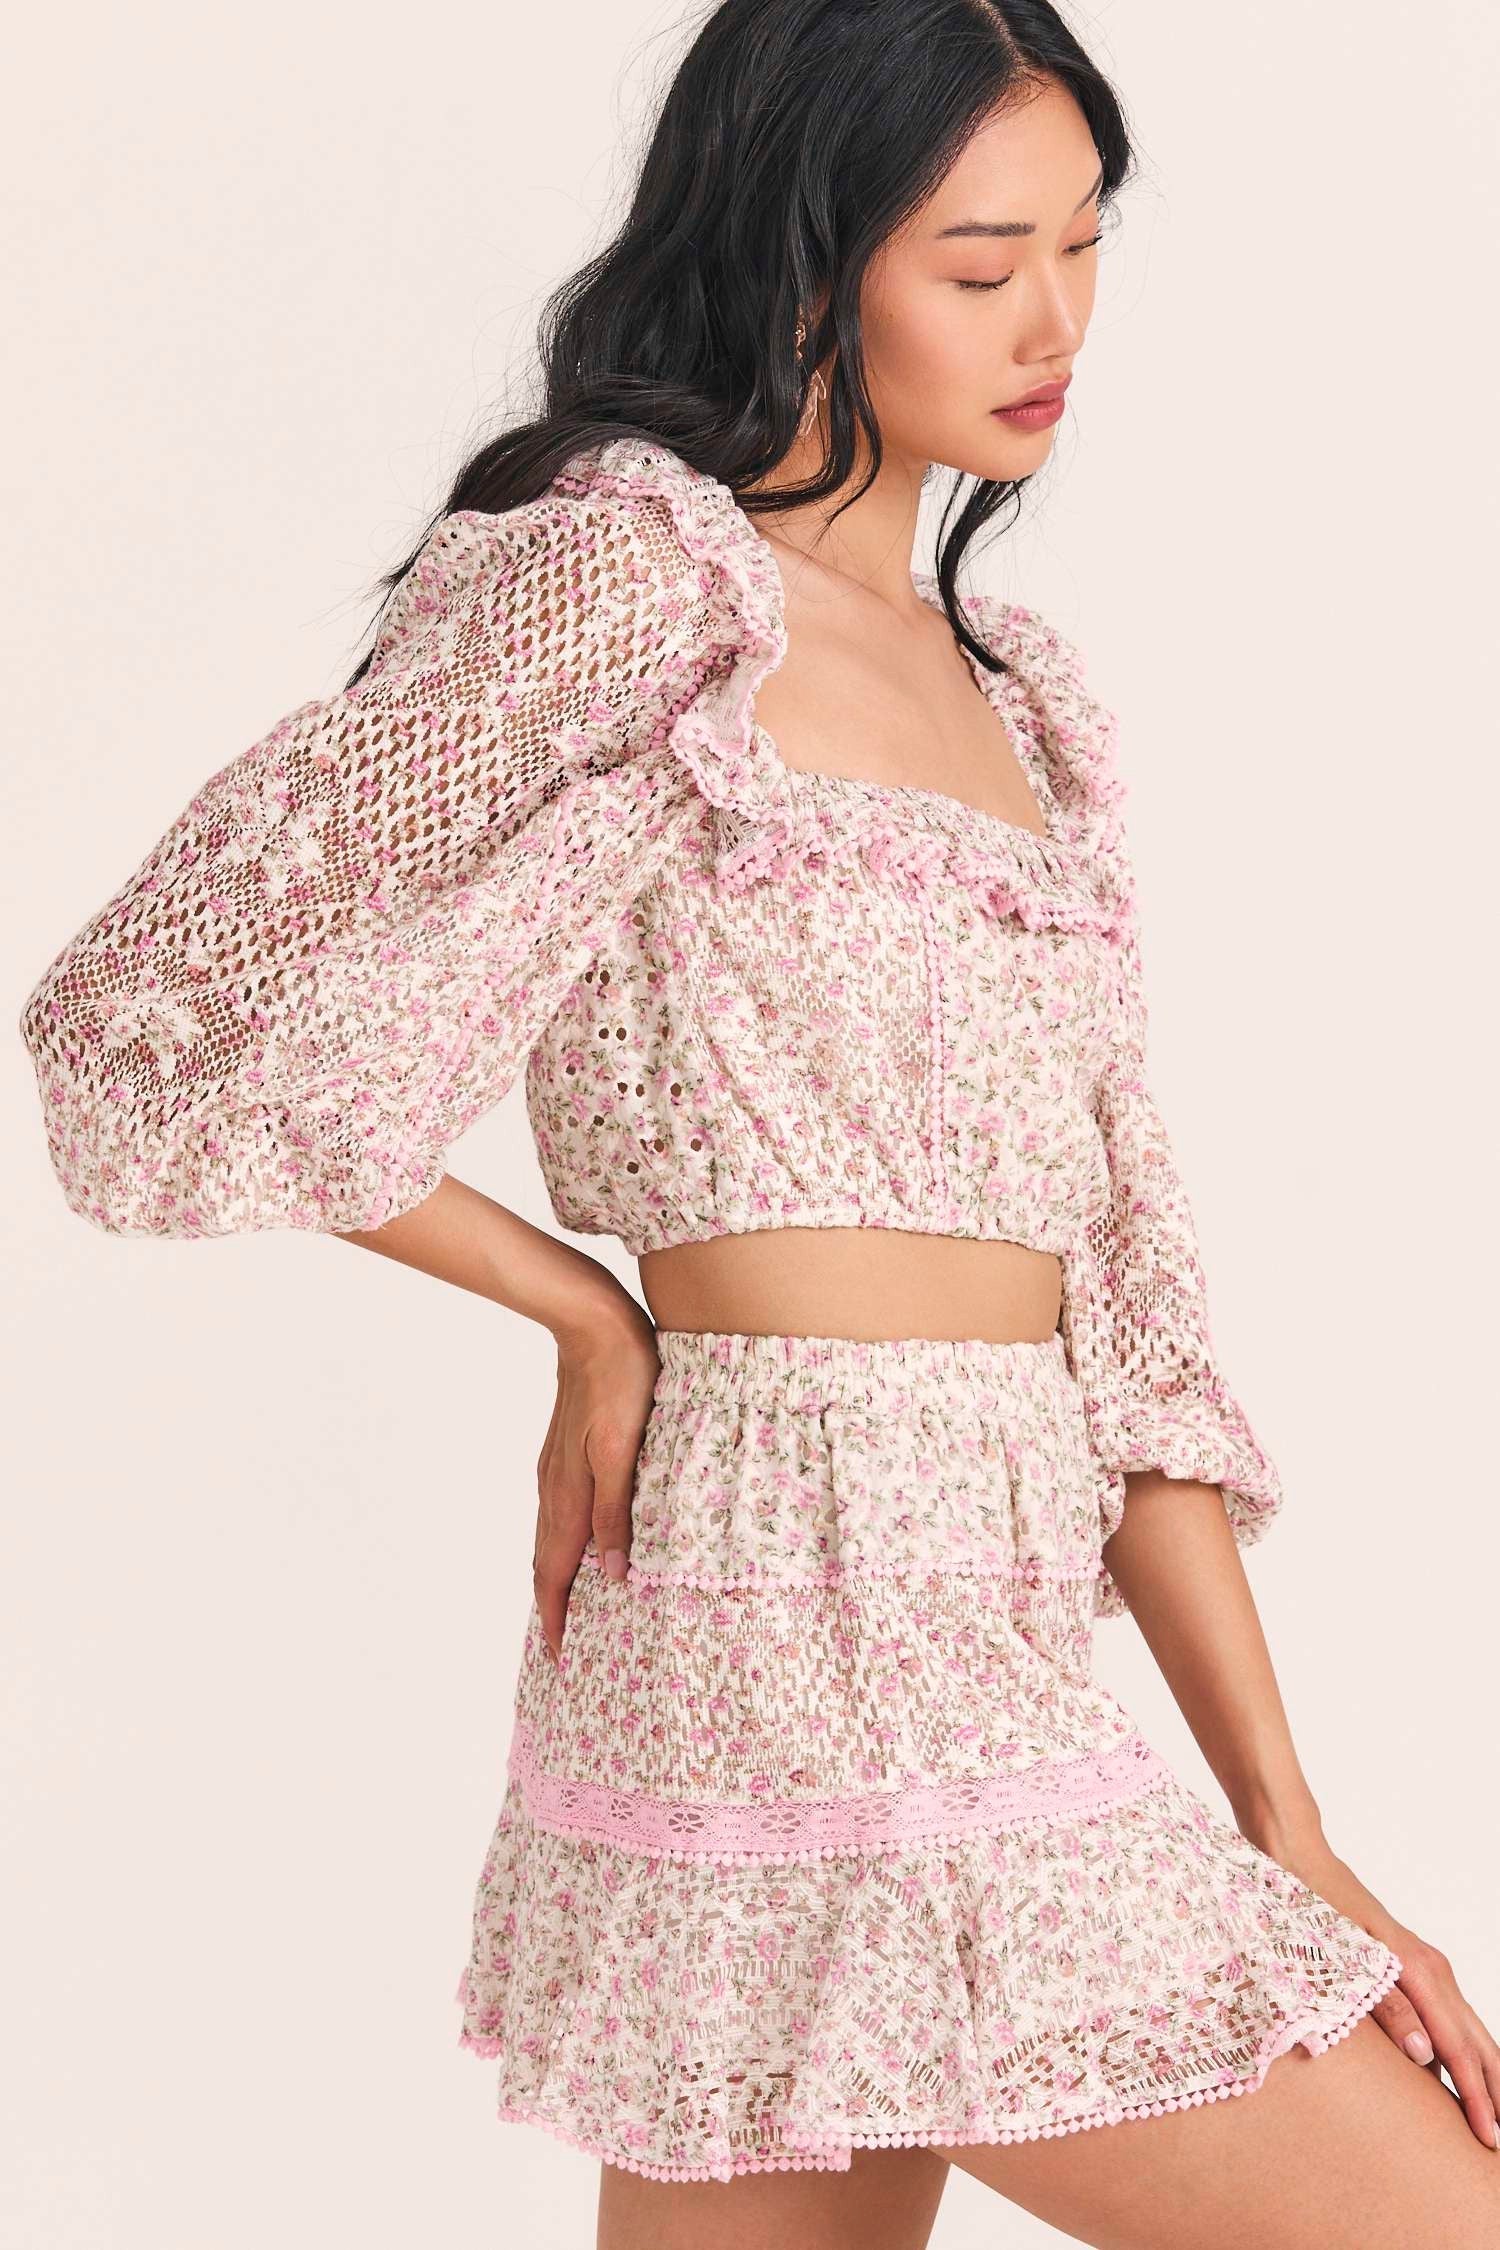 Women's three quarter sleeve cropped top with custom lace and eyelet fabrication, in a mixed micro floral print. 